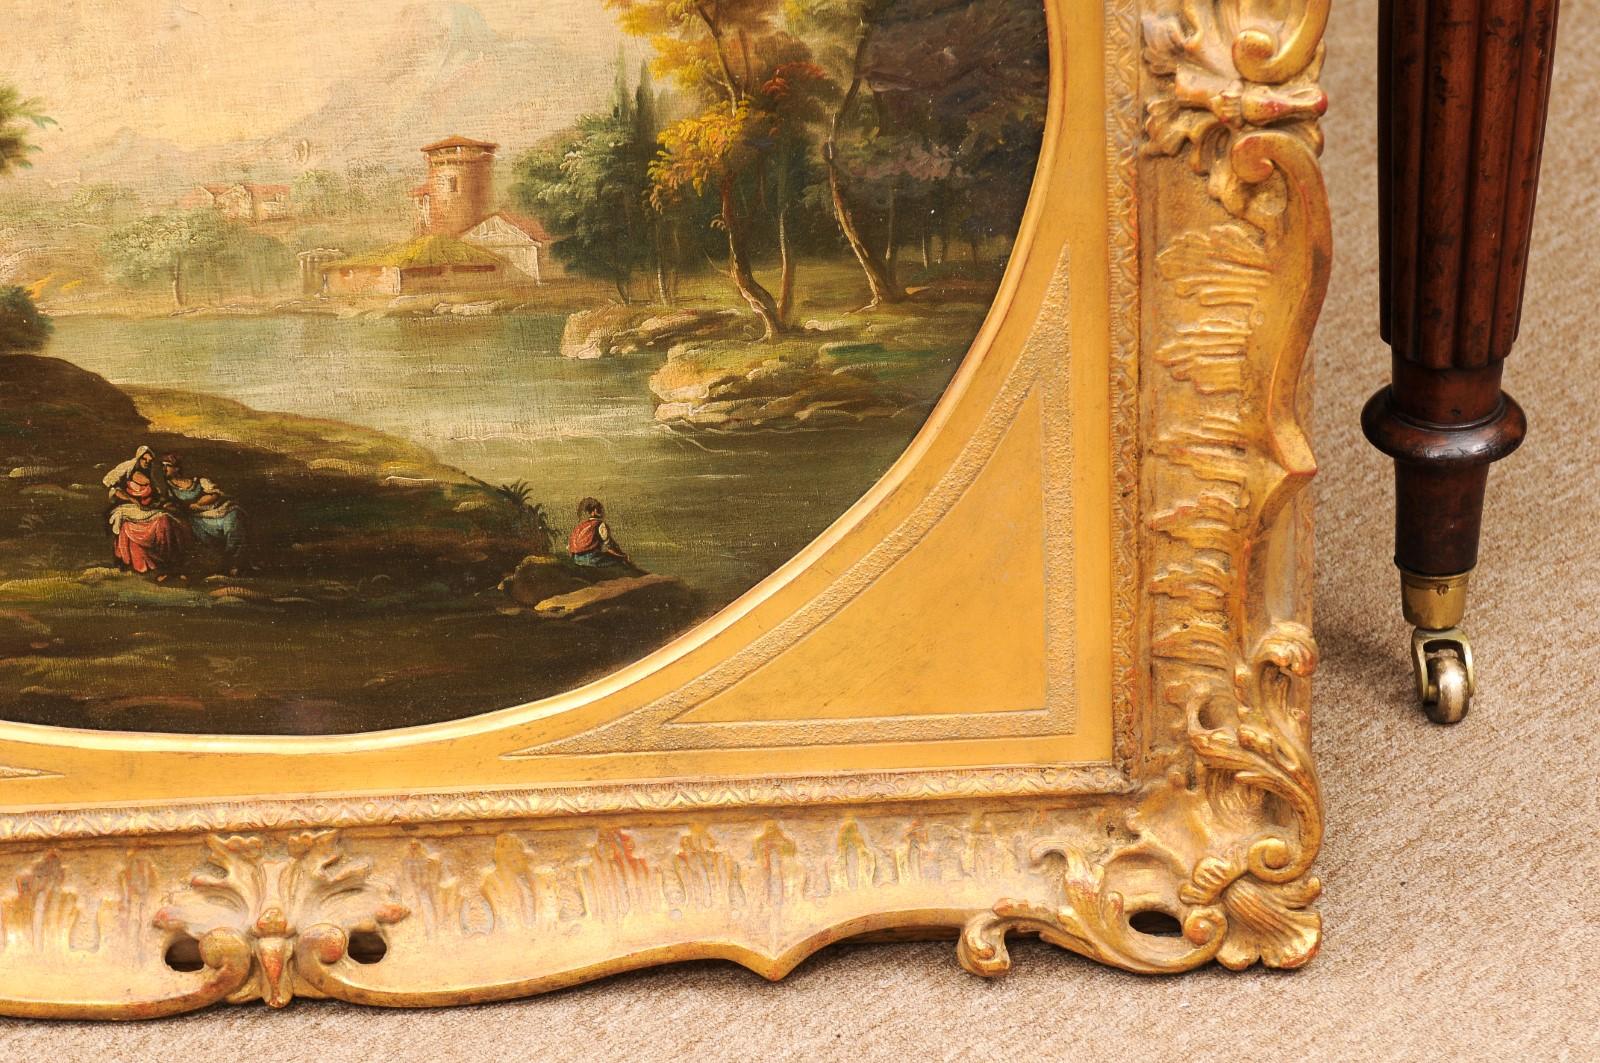 Large 19th Century English Oil on Canvas Landscape Painting in Gilt Frame For Sale 4